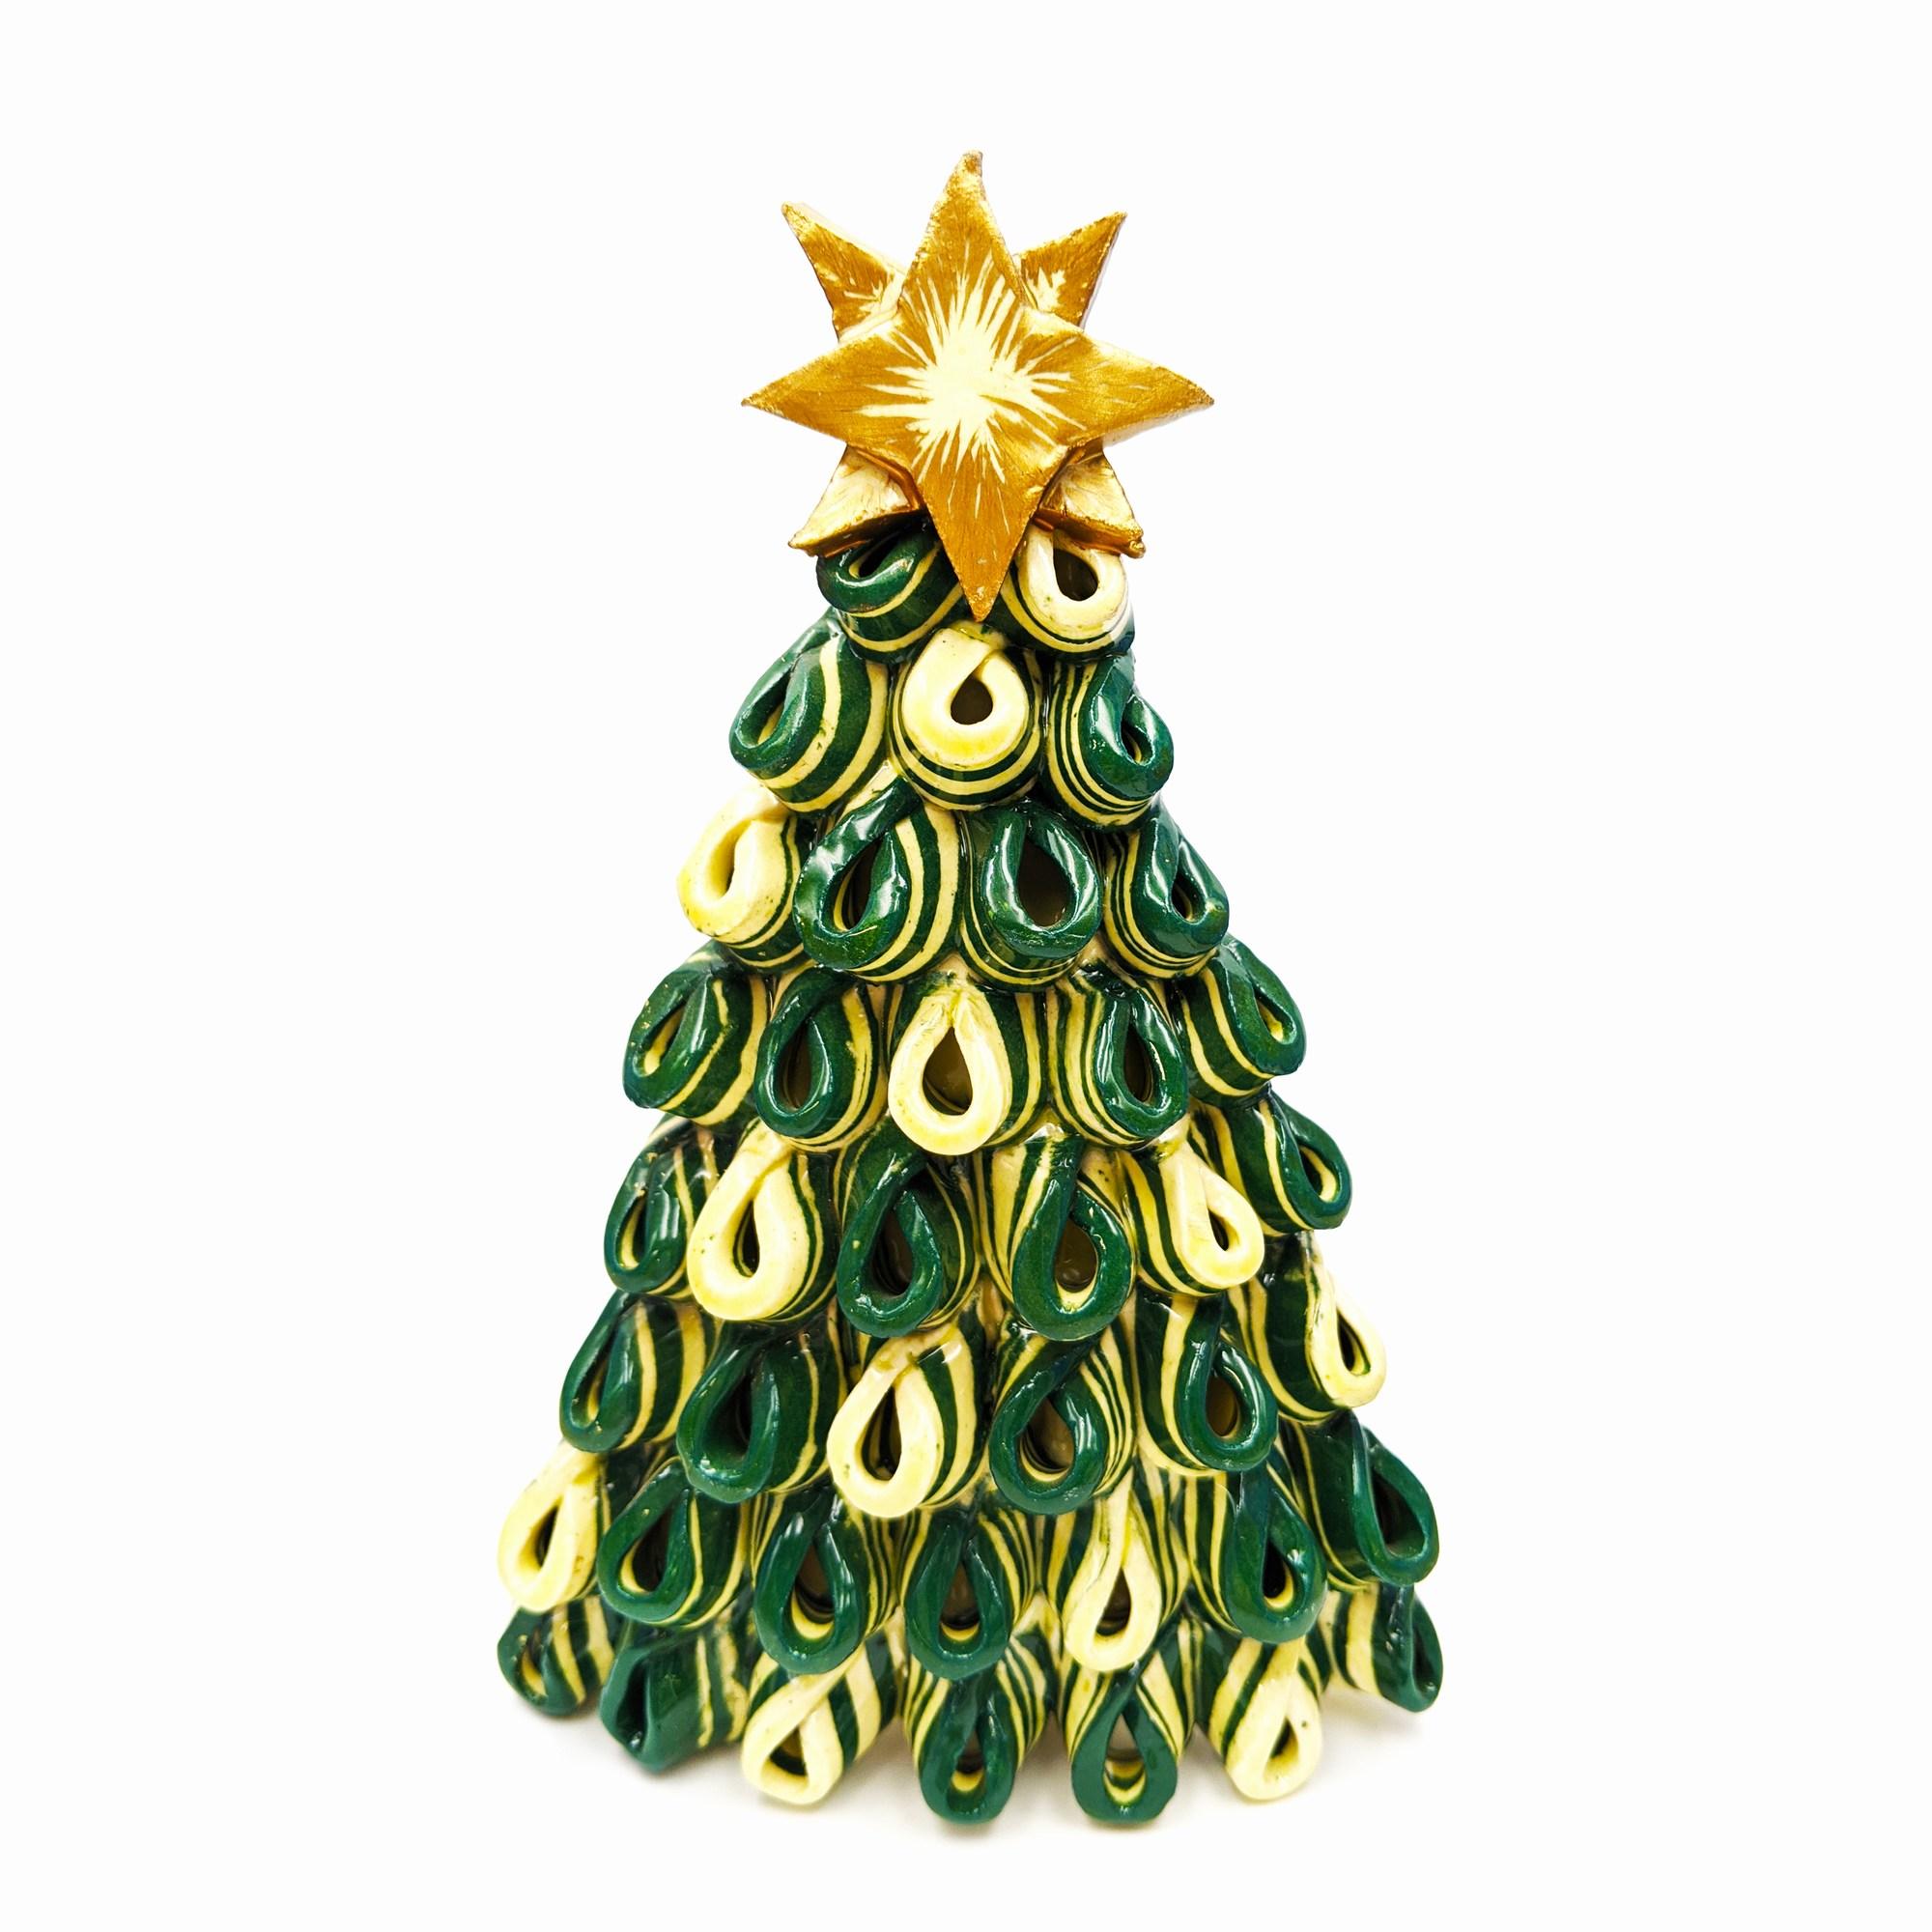 Christmas Tree with Golden Star - Sculpture by Irma Starr